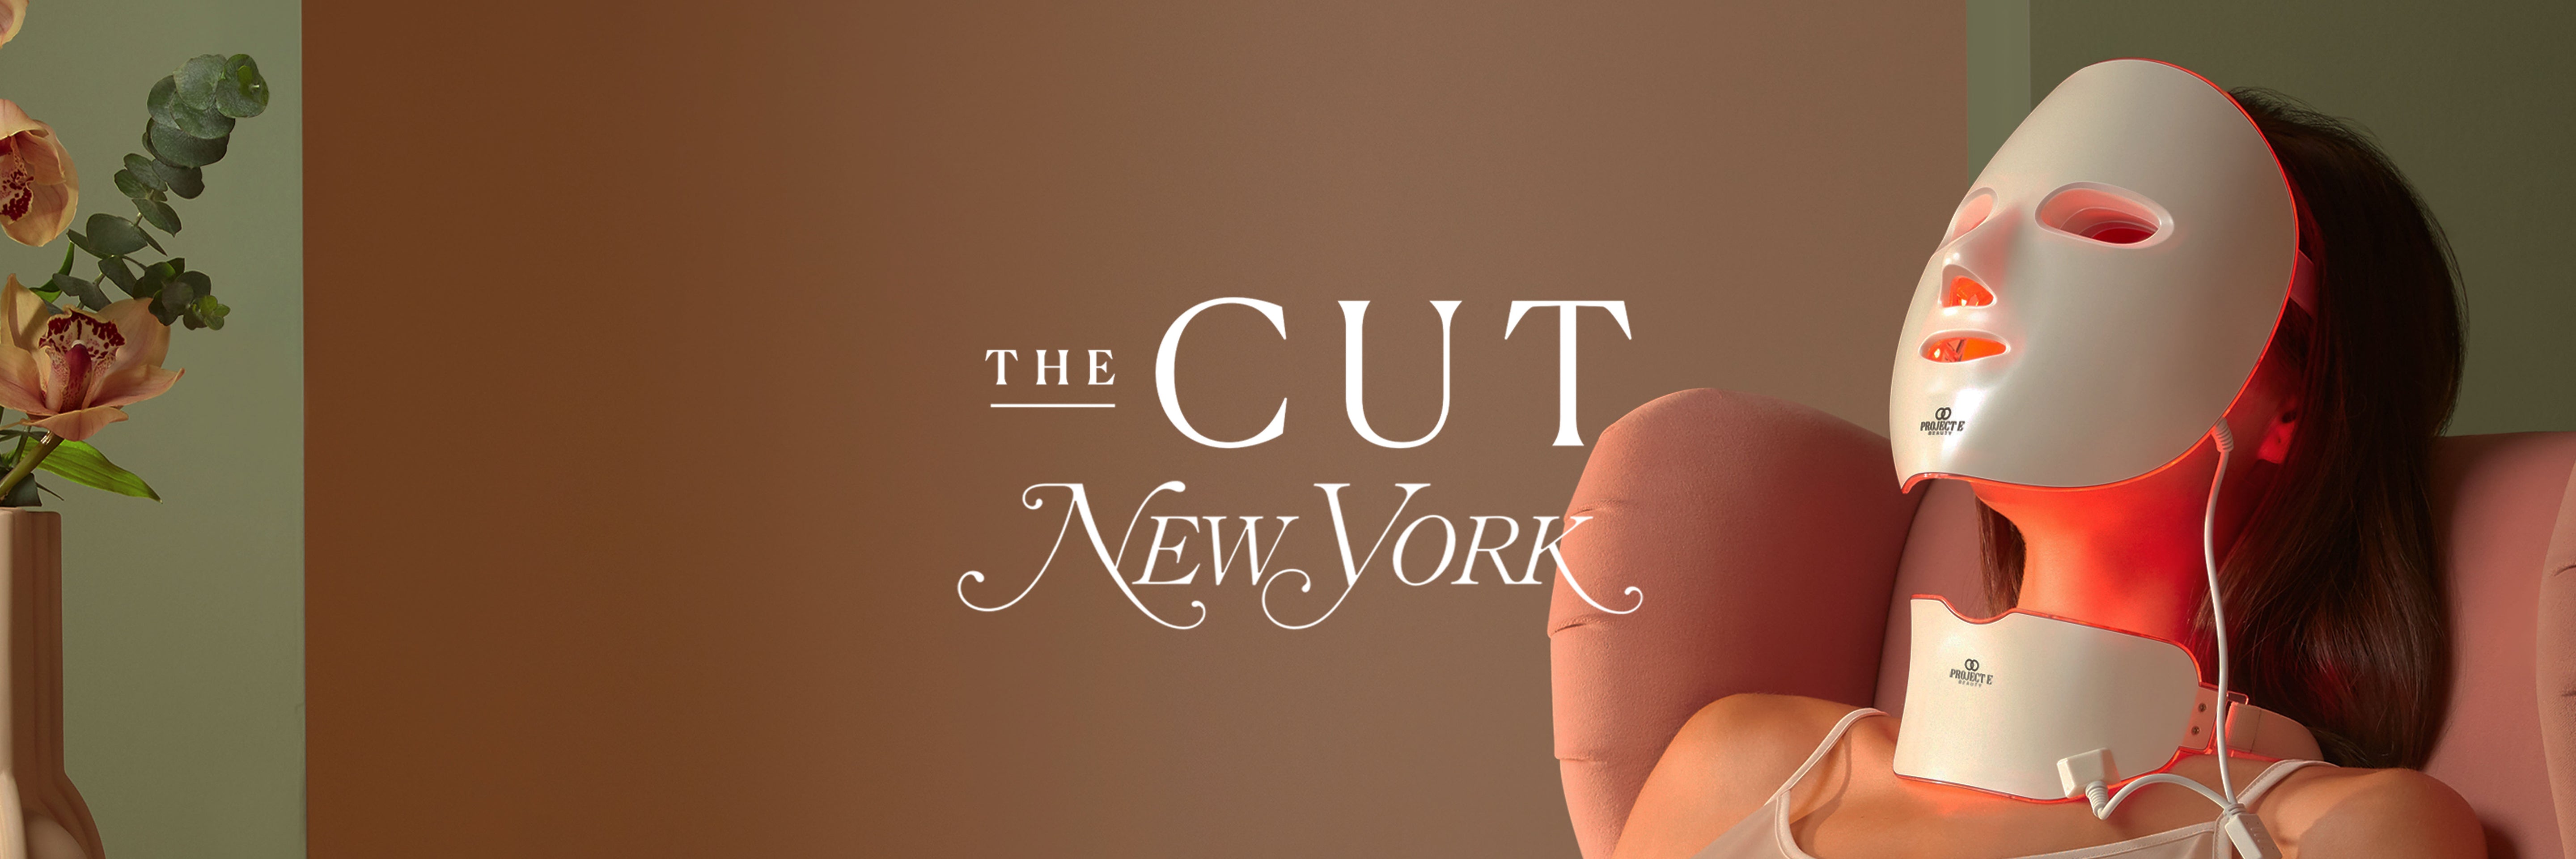 THE CUT INCLUDES OUR LIGHTAURA PLUS IN THIS MUST-SEE LIST